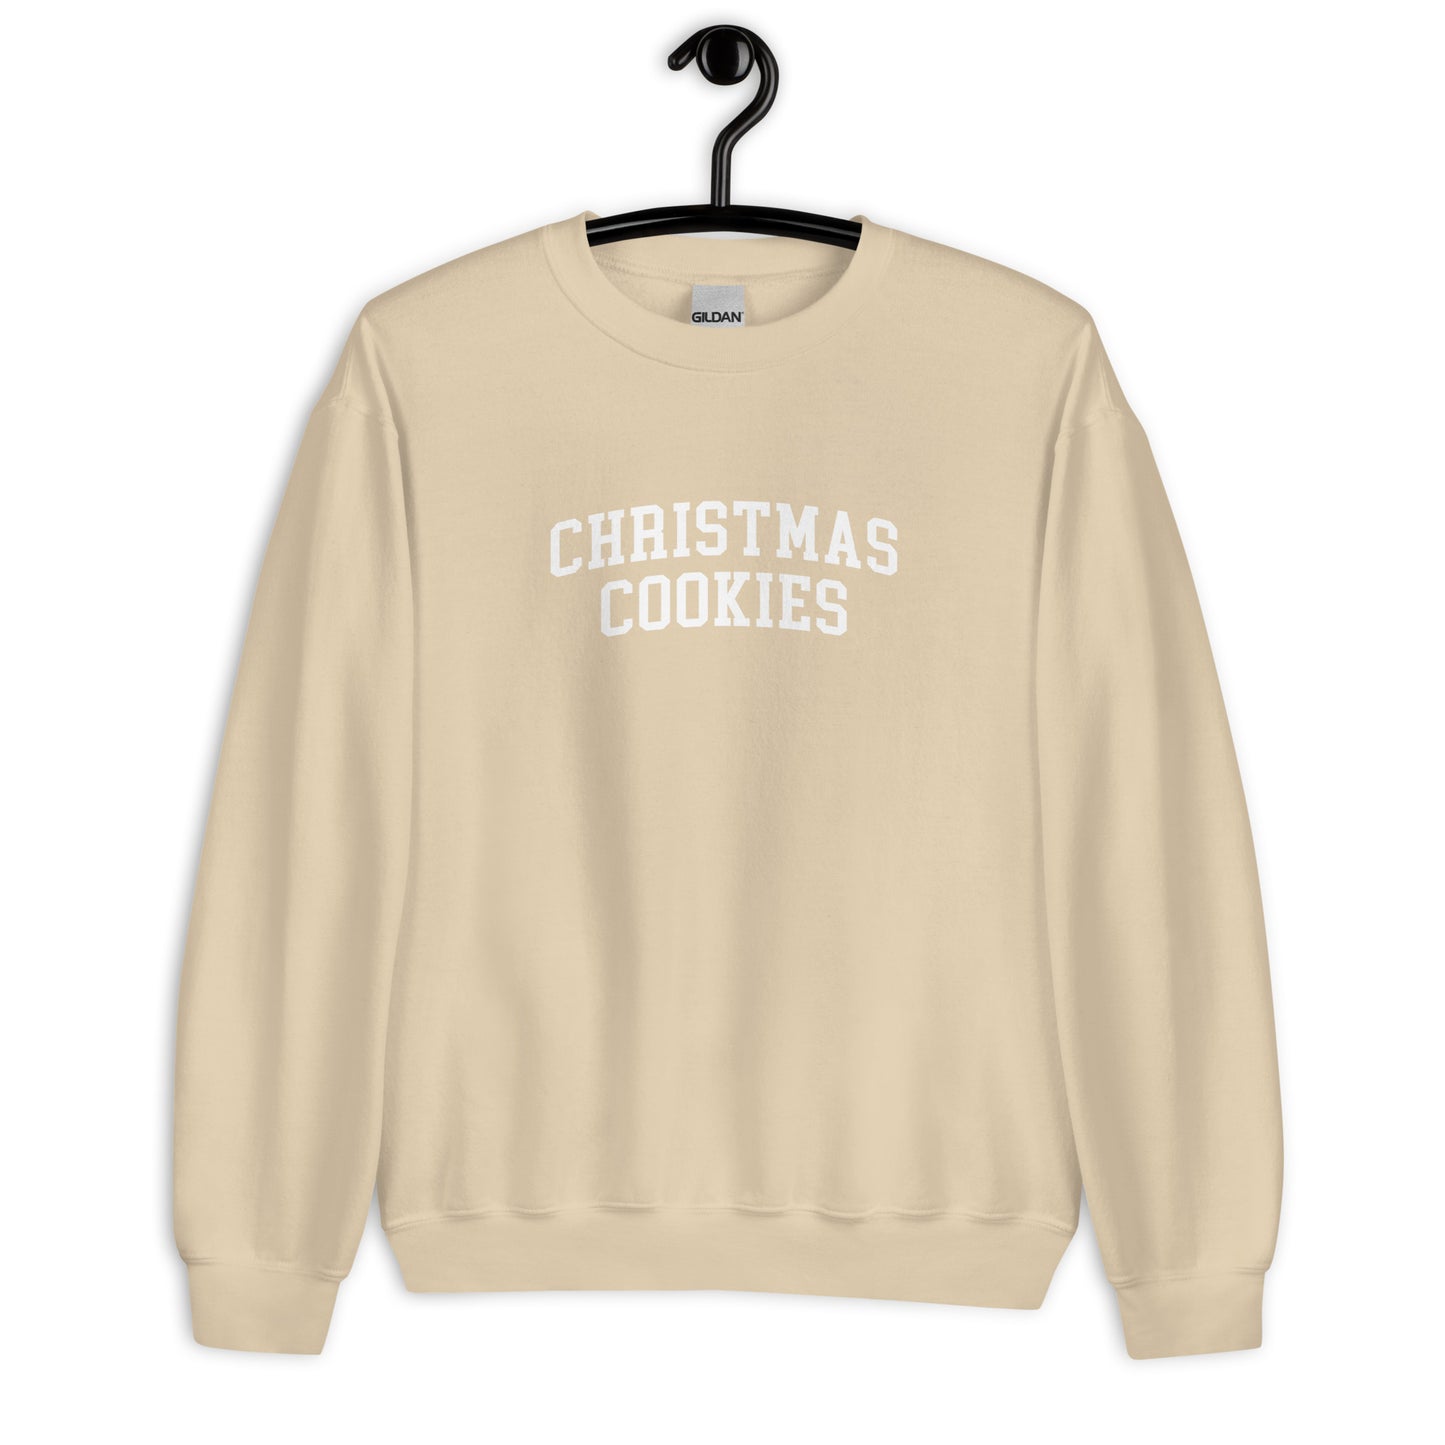 Christmas Cookies Sweatshirt - Arched Font